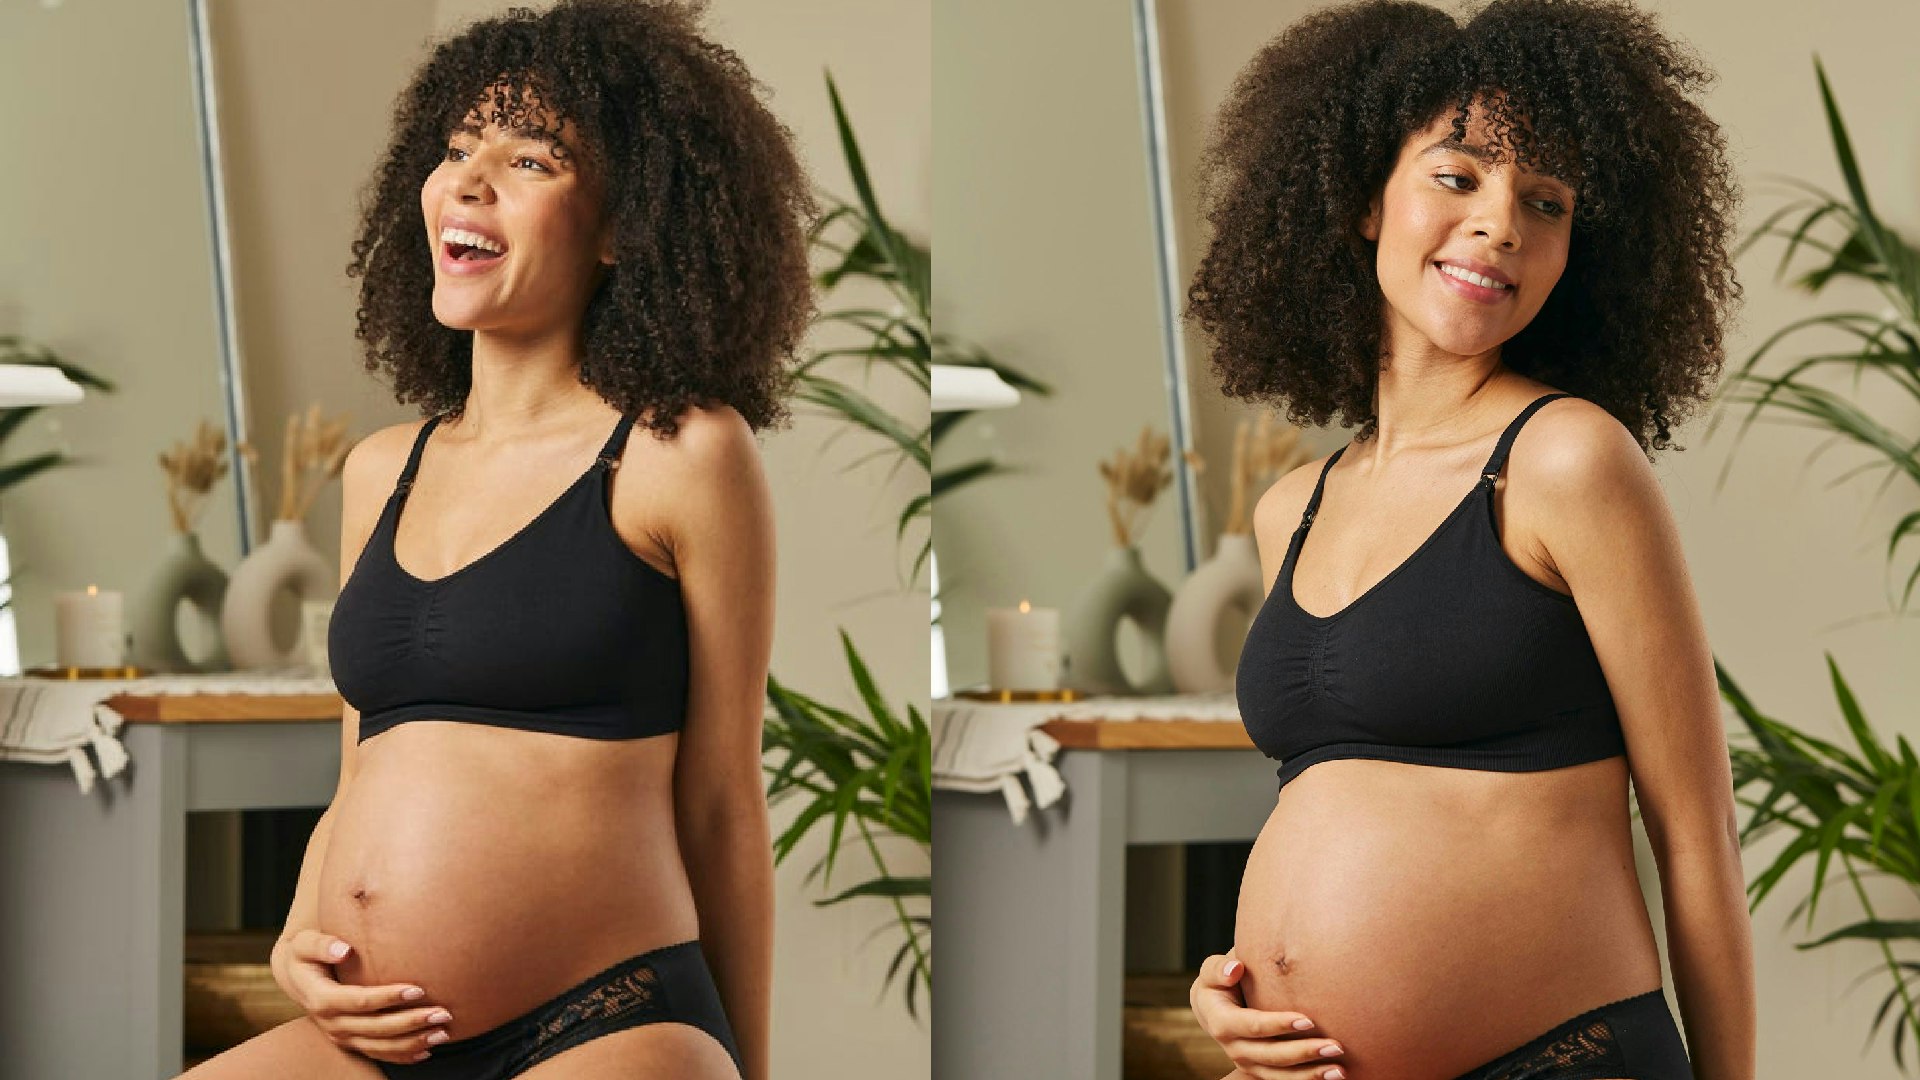 https://images.bauerhosting.com/legacy/media/6246/0357/a4bf/4976/9611/2926/best-maternity-lingrie.png?ar=16%3A9&fit=crop&crop=top&auto=format&w=undefined&q=80